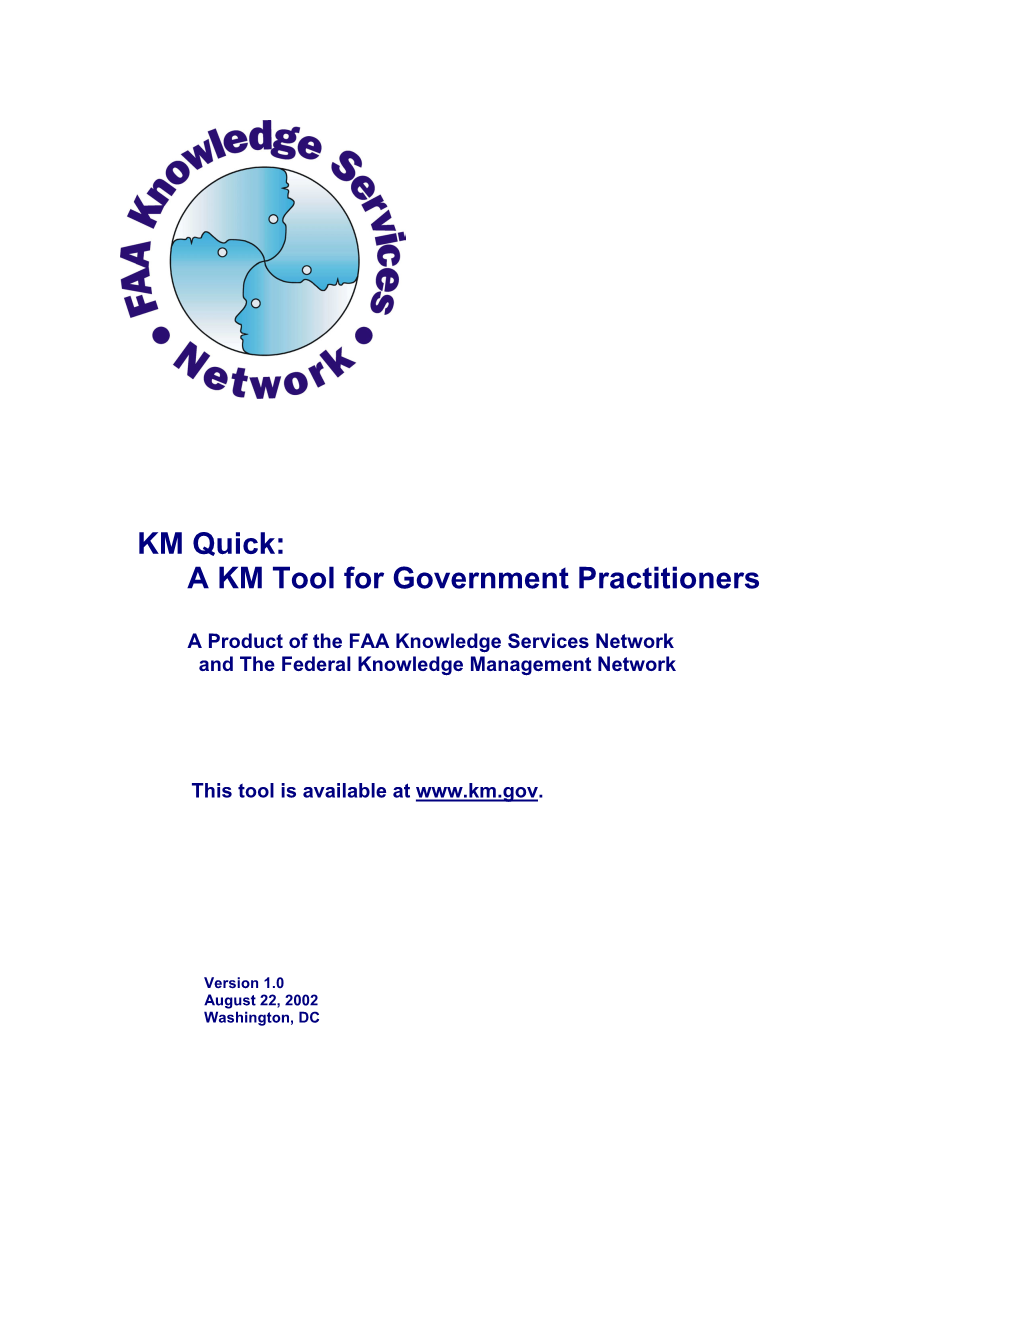 KM Quick: a KM Tool for Government Practitioners